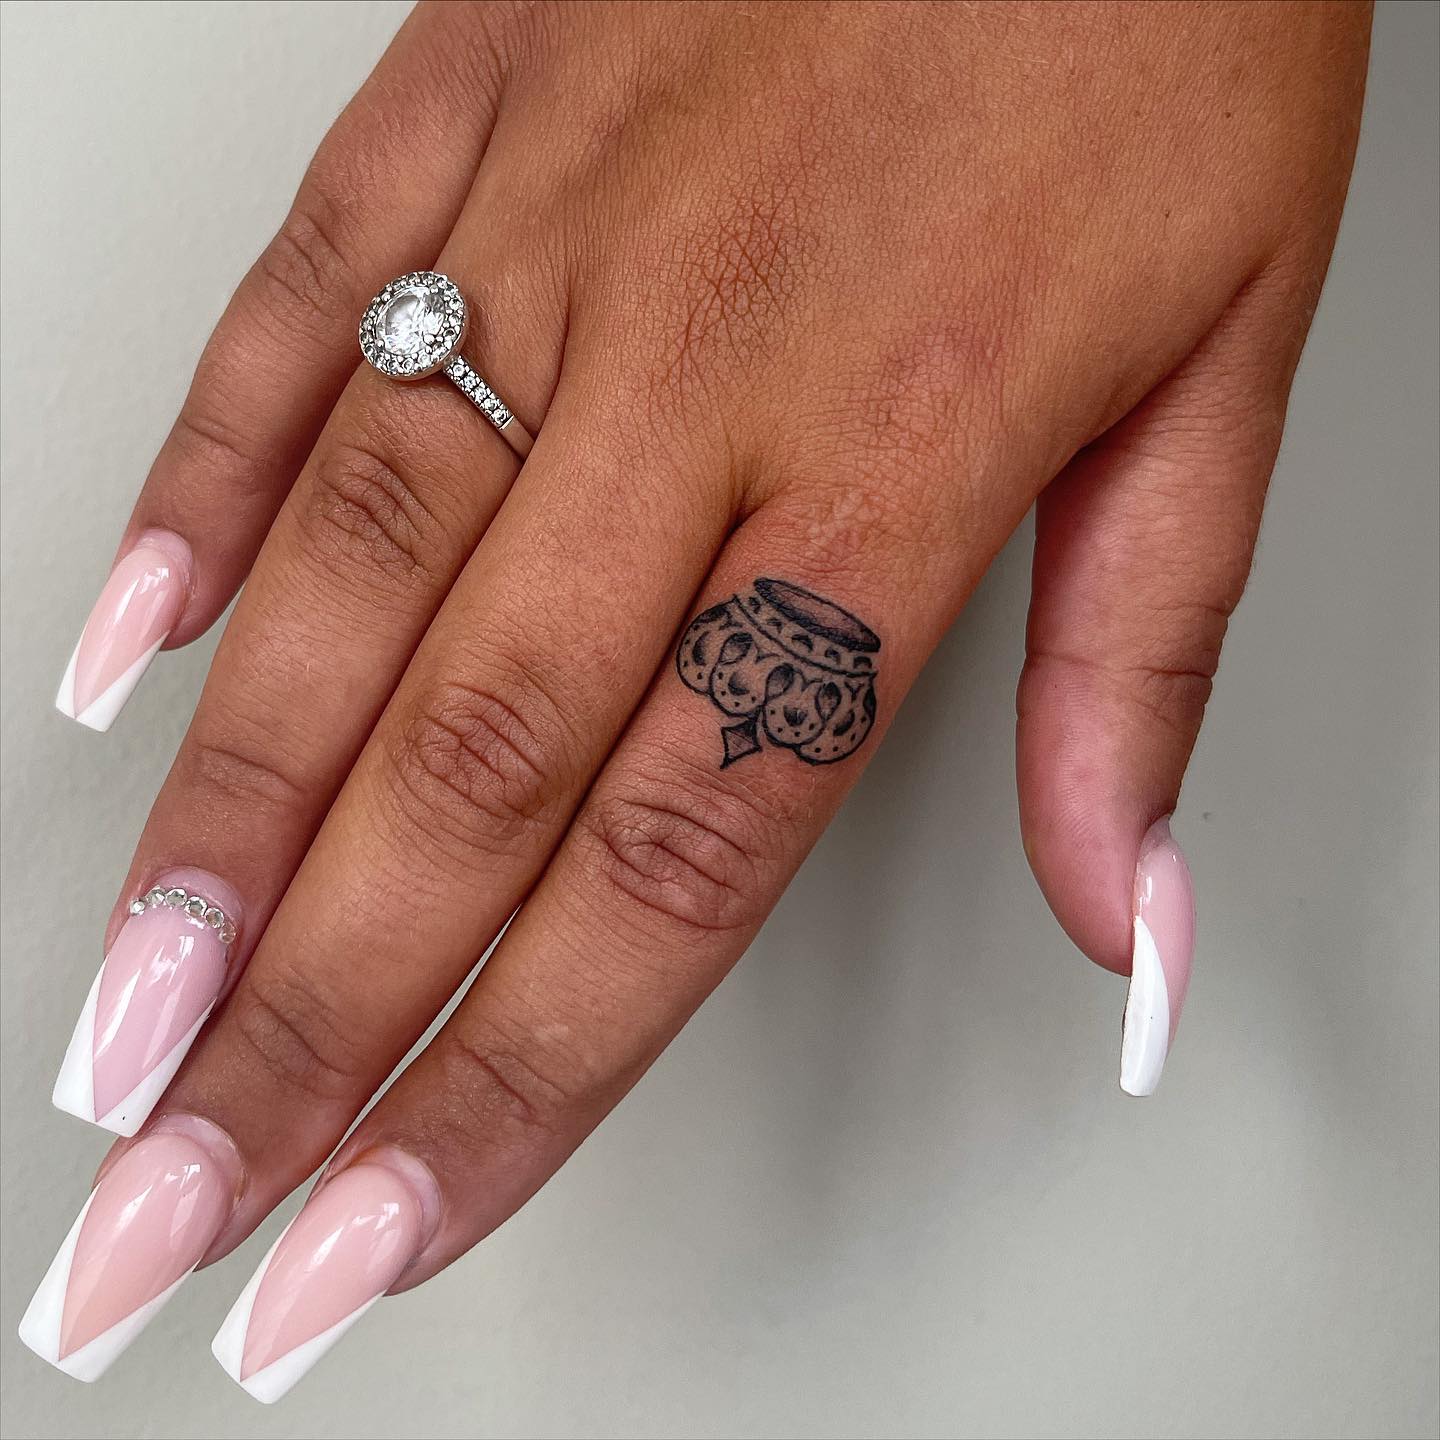 Crown Tattoo on Index Finger for Women